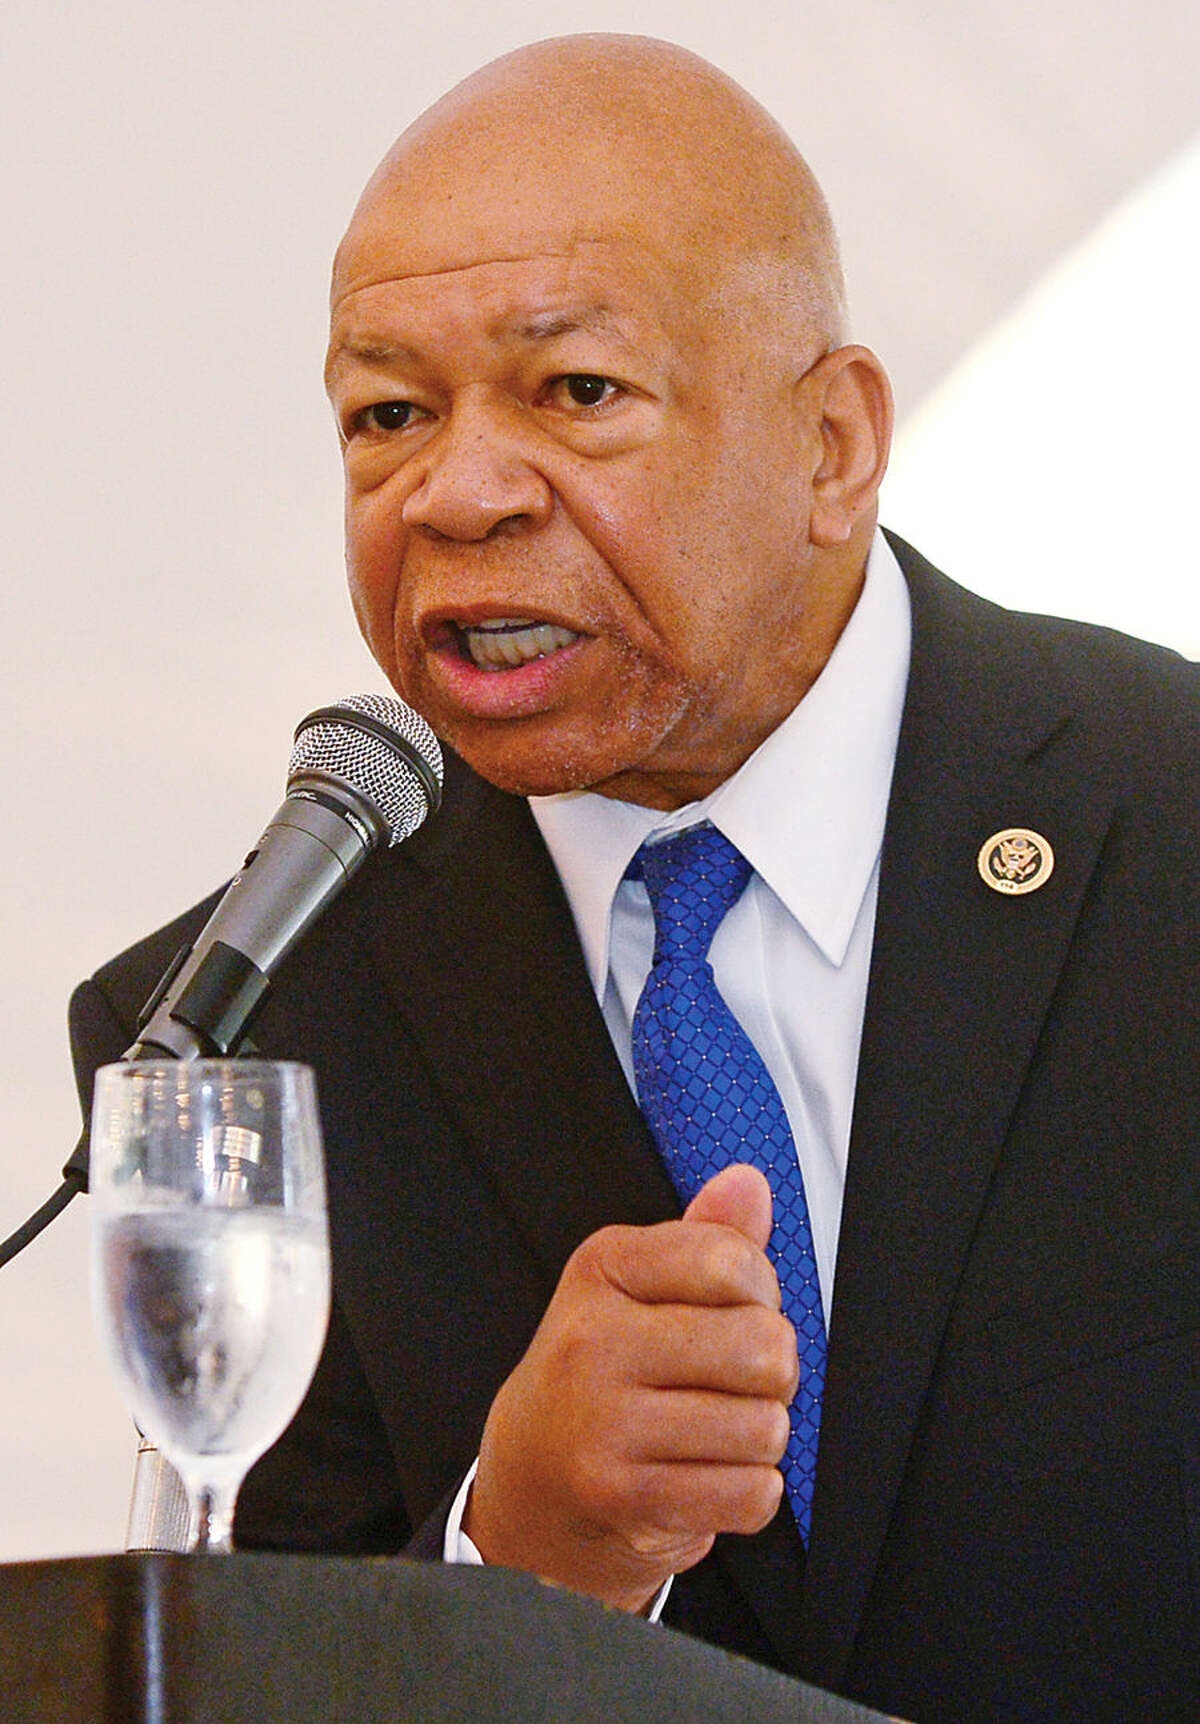 Hour photo / Erik Trautmann Congressman Elijah Cummings give his keynote address at the NAACP State Convention and Civil Rights LuncheonS aturday at the Hilton Hotel in Stamford.